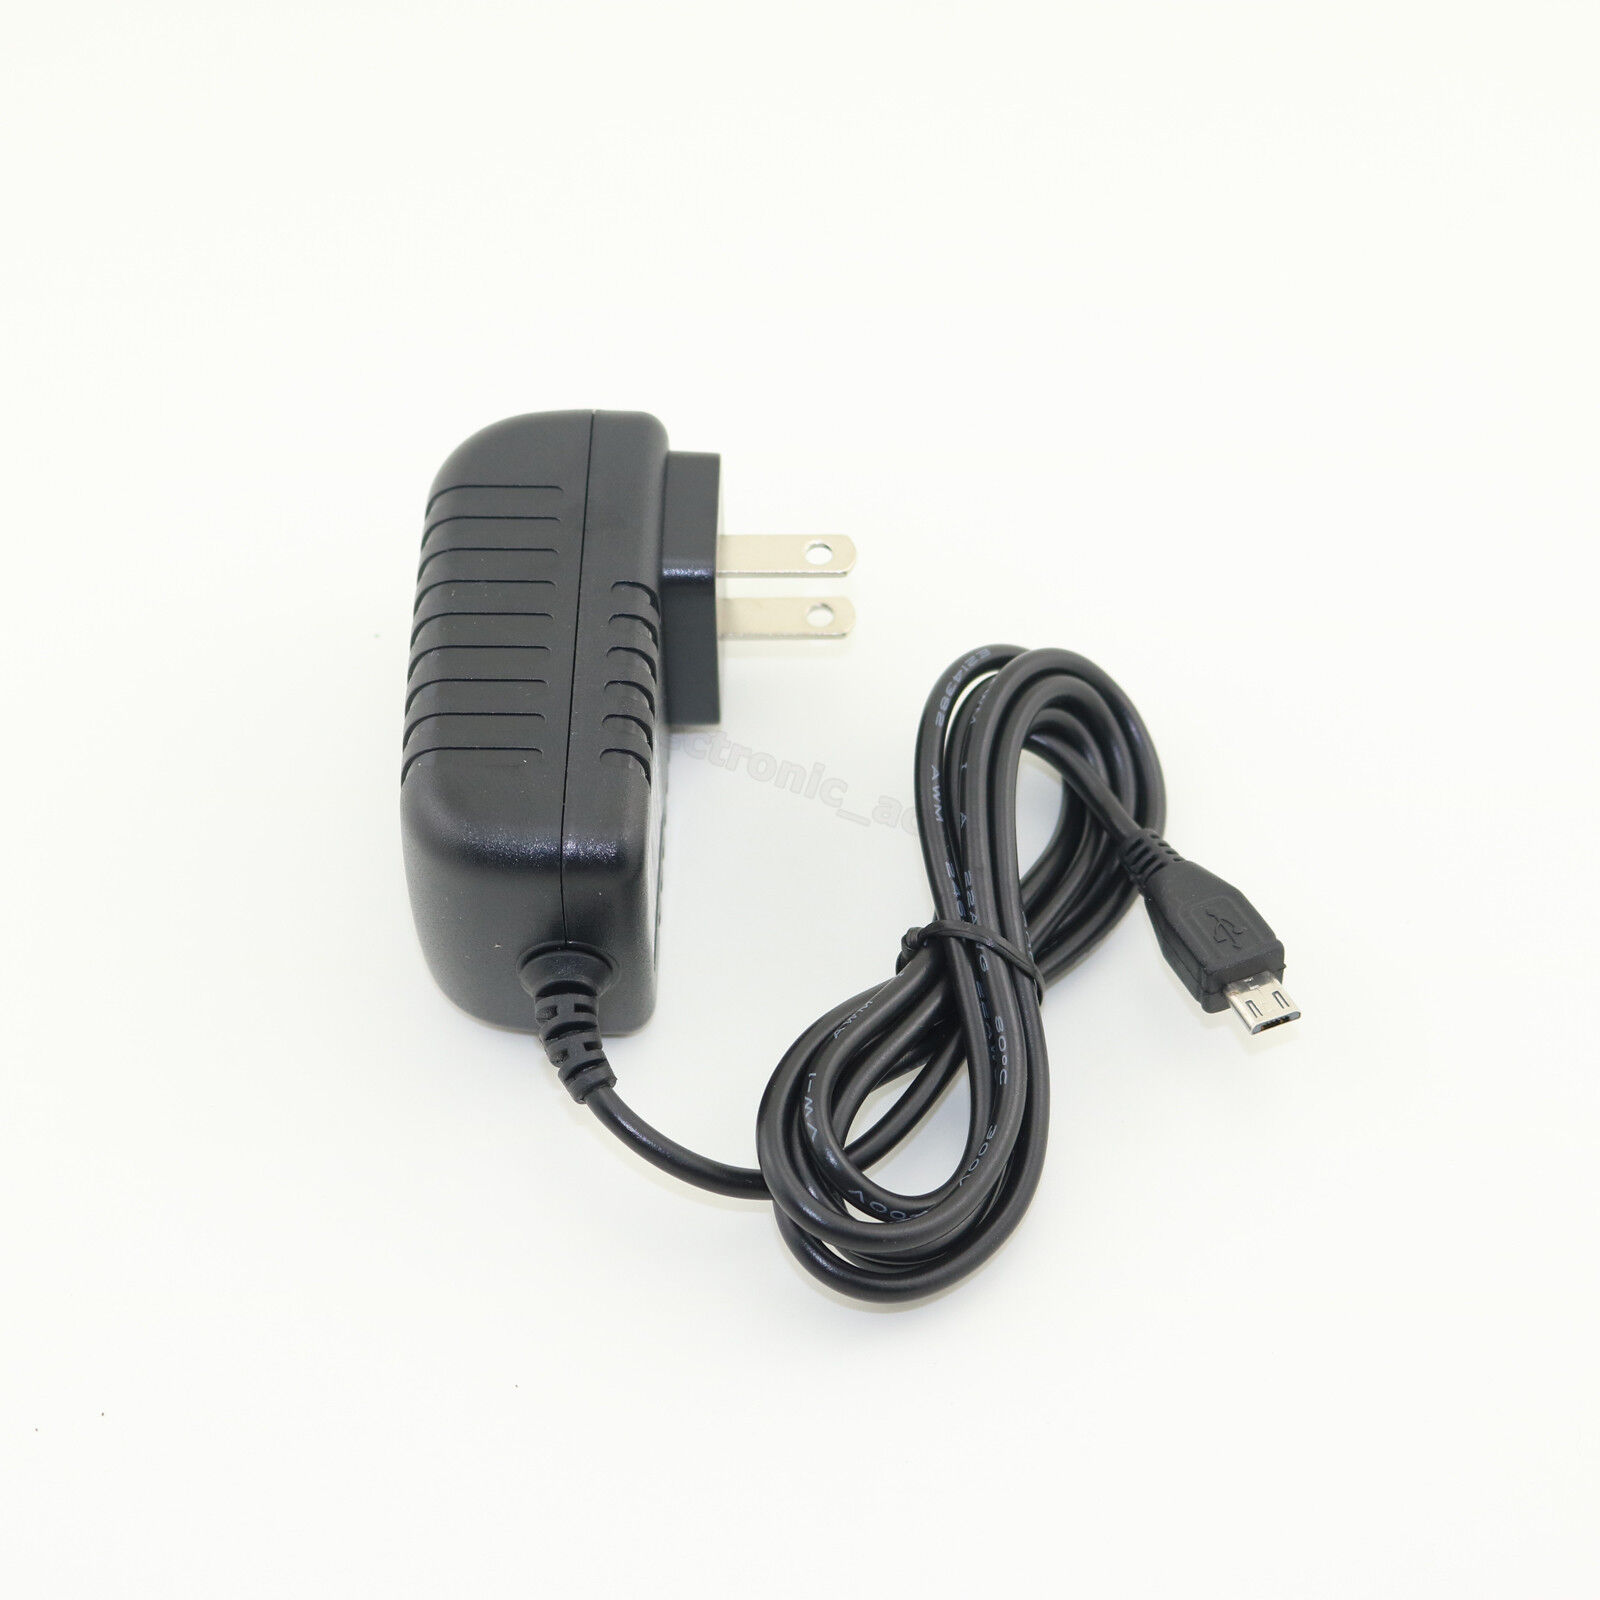 *Brand NEW*Wall Charger for Raspberry Pi B+ 2 3 5V 2.5A Micro USB Power Converter Adapter